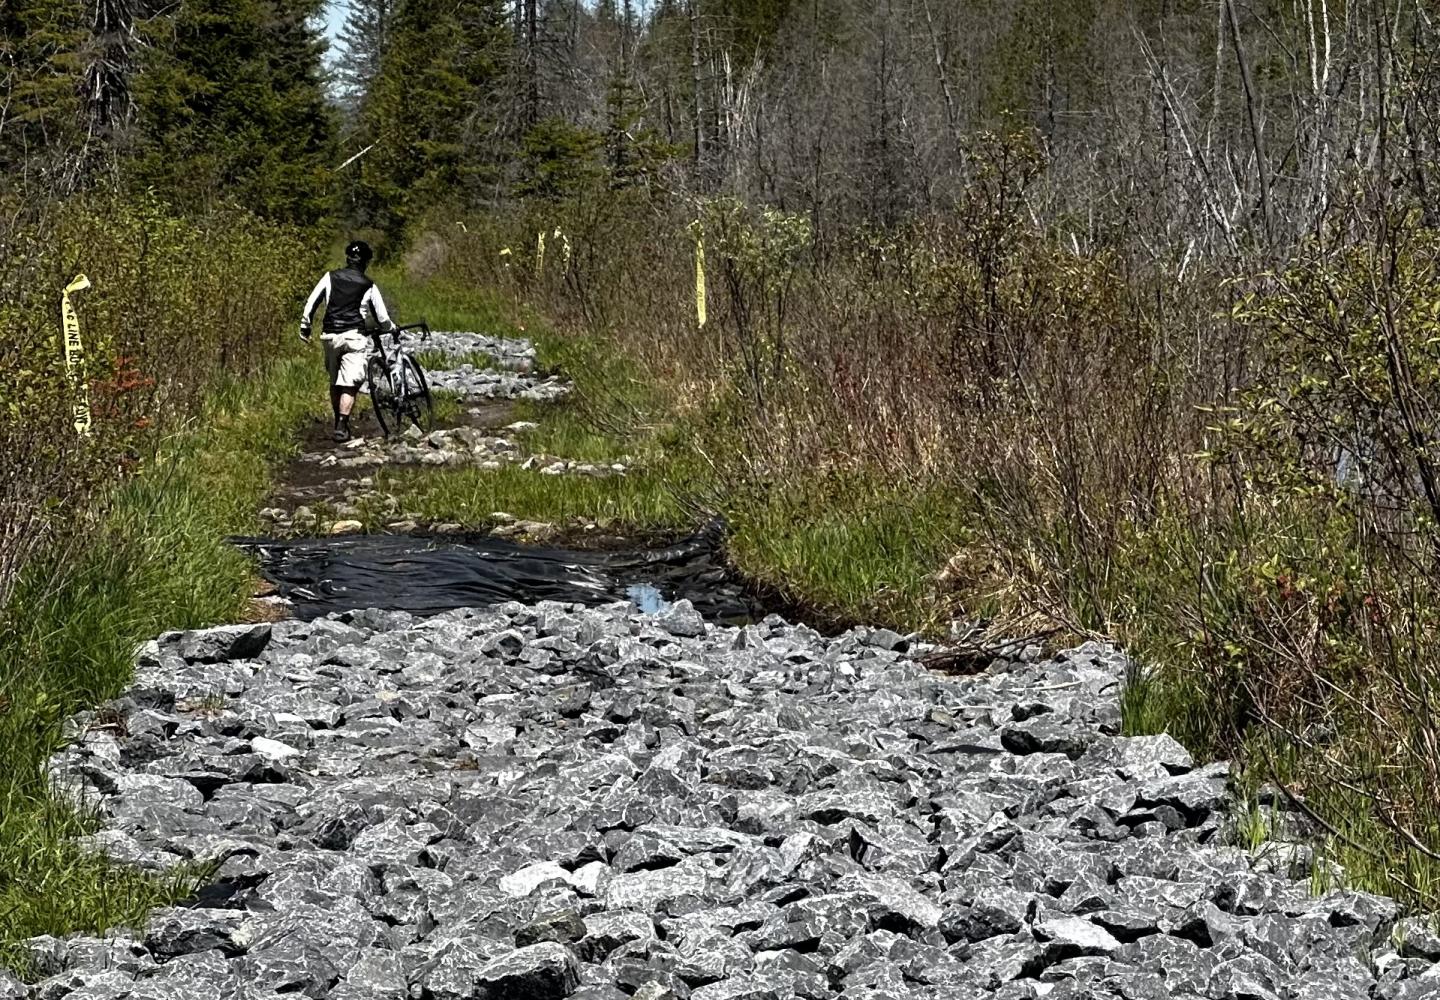 A section of the Bloomingdale Bog Trail has been covered with rocks, making biking difficult, if not impossible. Good news is it's a short section.